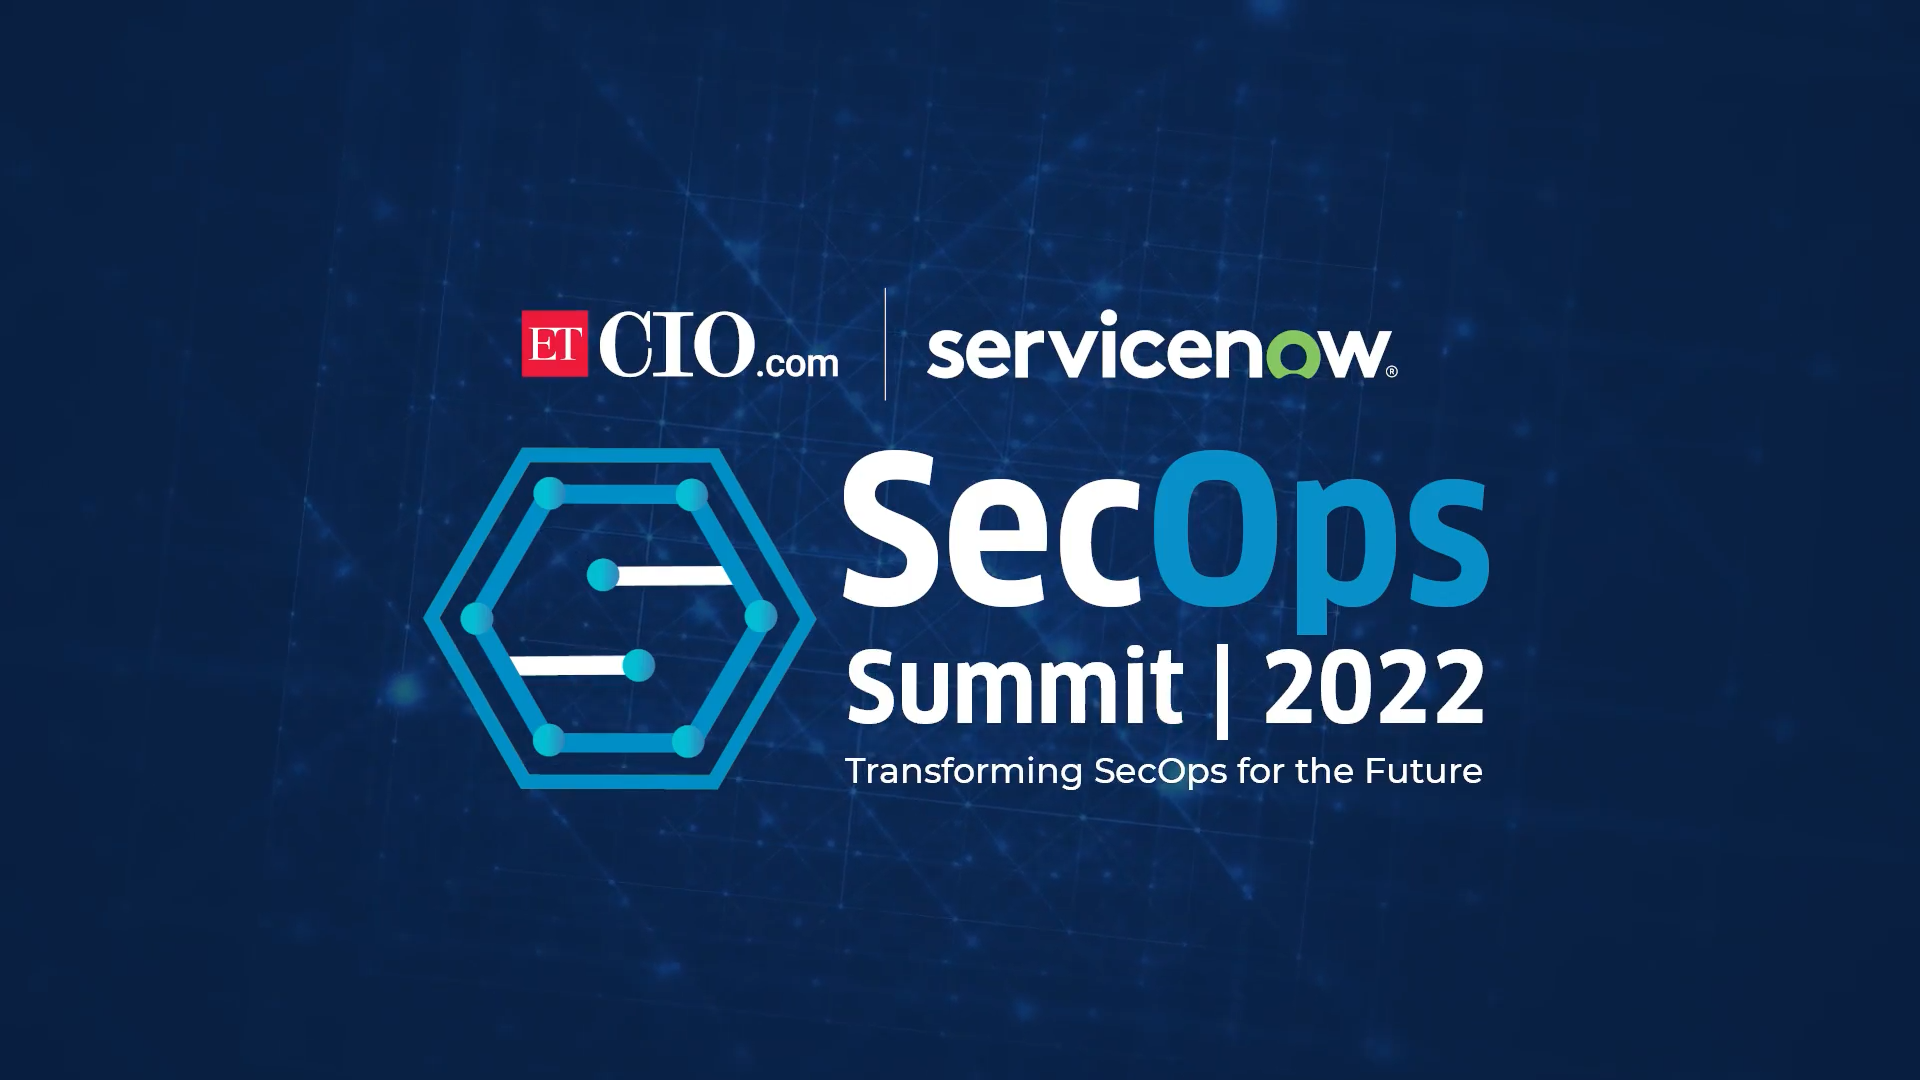 Transforming security operations for the future: SecOps Summit 2022 key highlights